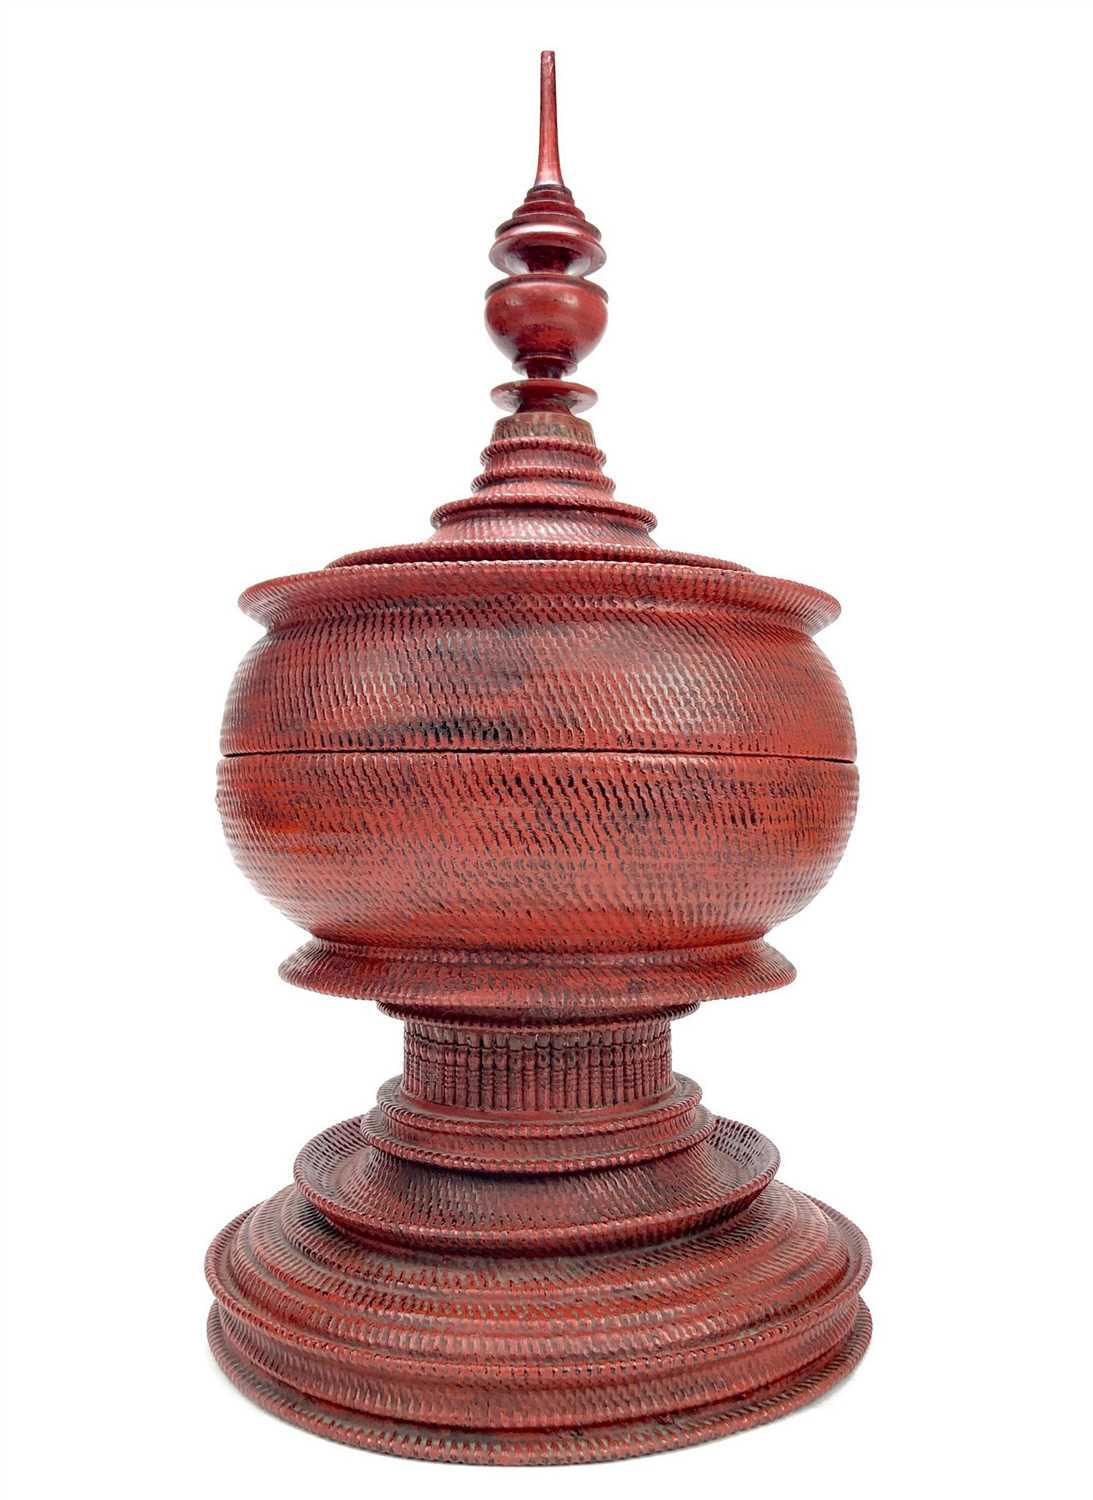 Lot 1043 - AN EARLY 20TH CENTURY RED LACQUER AND BAMBOO HSUN-OK